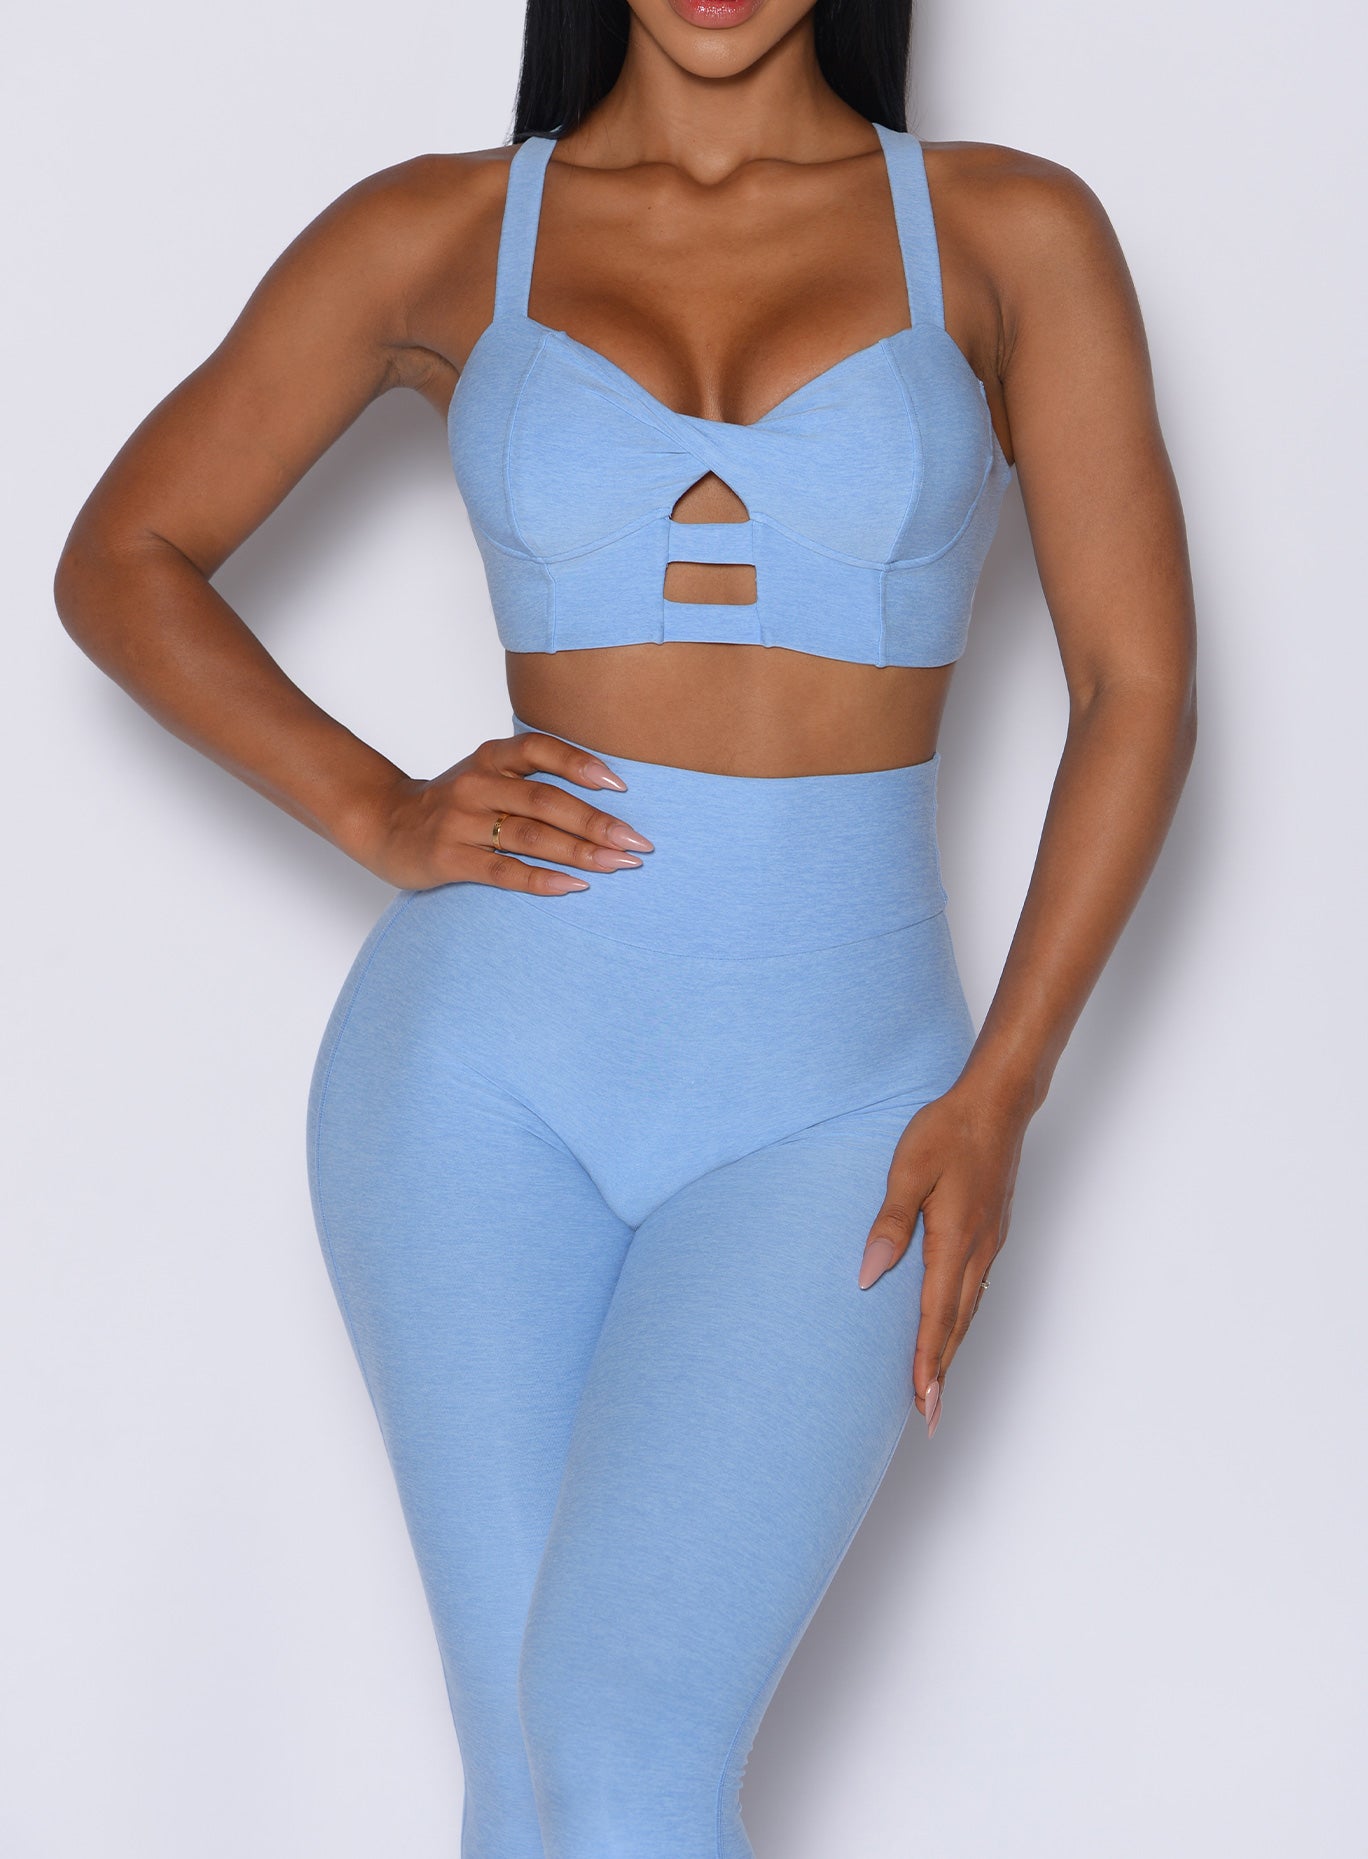 front profile view of a model wearing our core set bra in bright hydrangea color along with the matching leggings